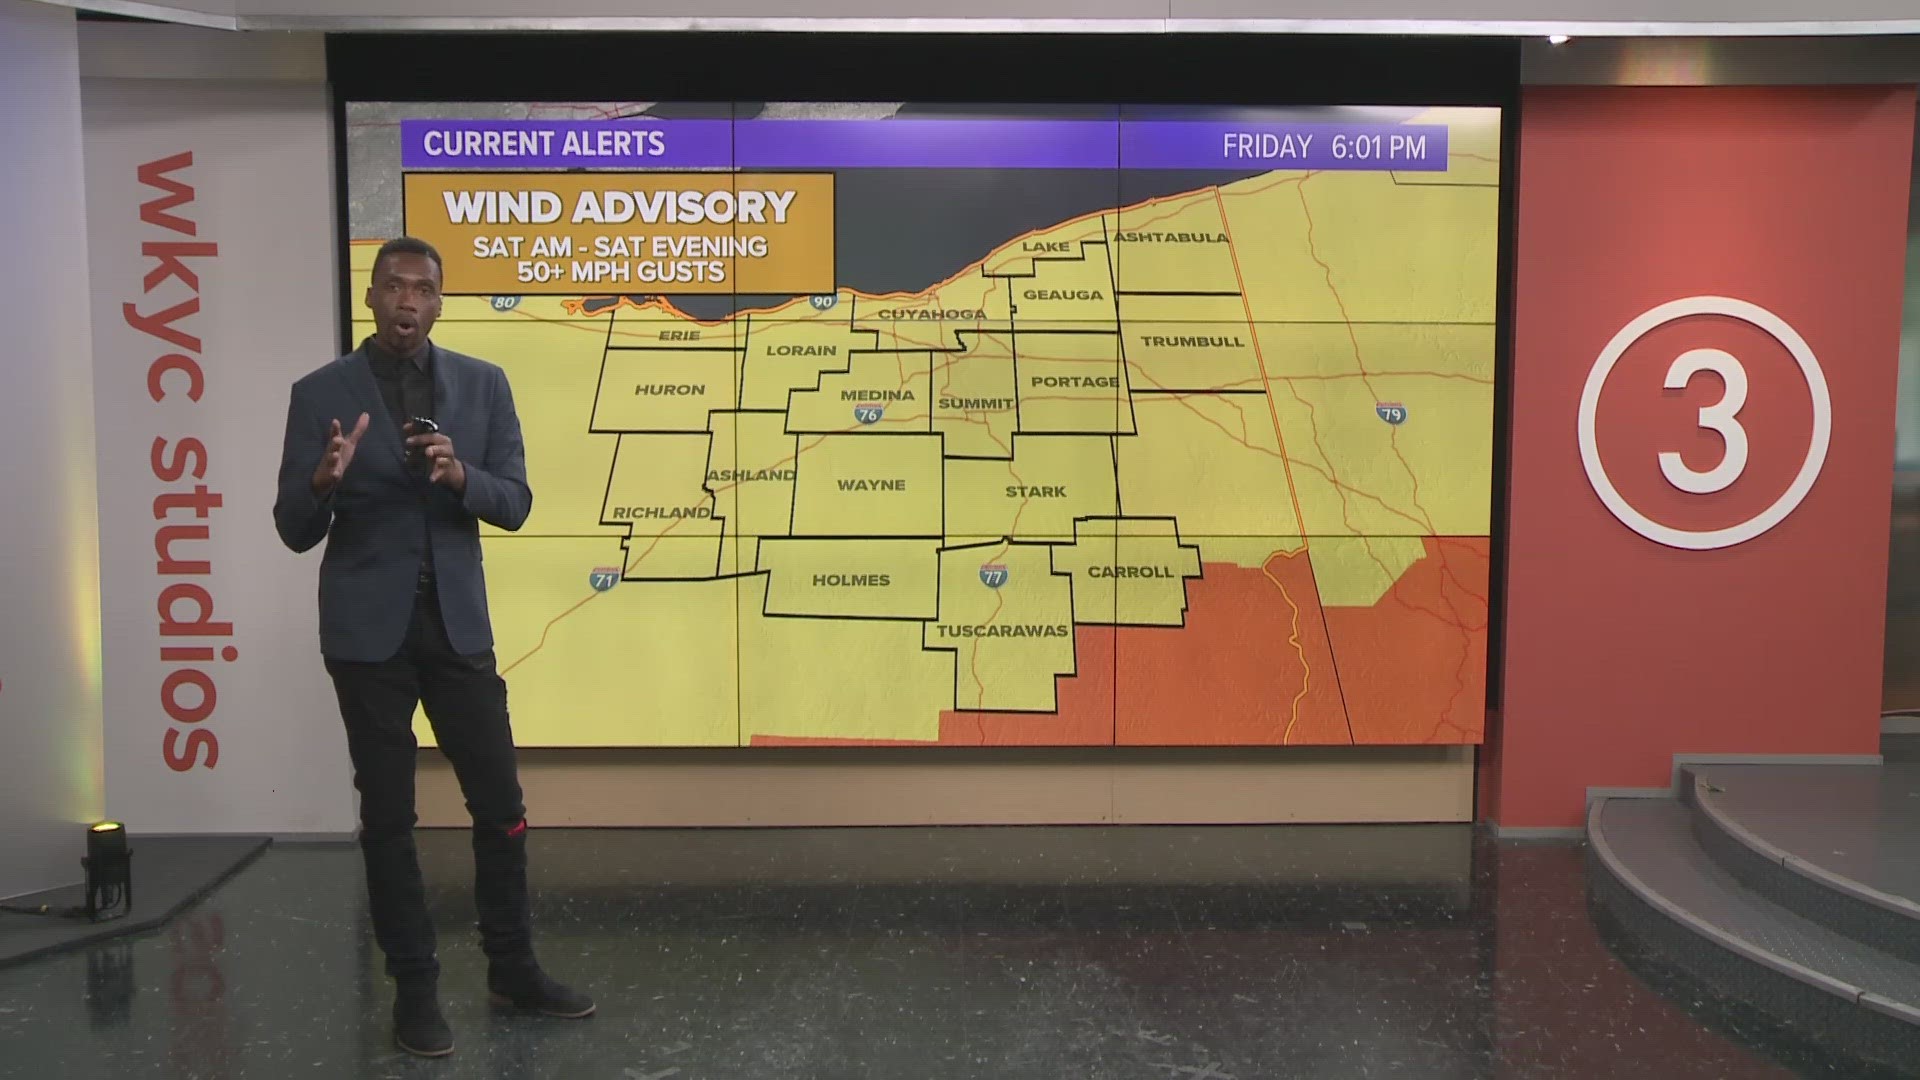 The National Weather Service says gusts on Saturday could top 50 mph.